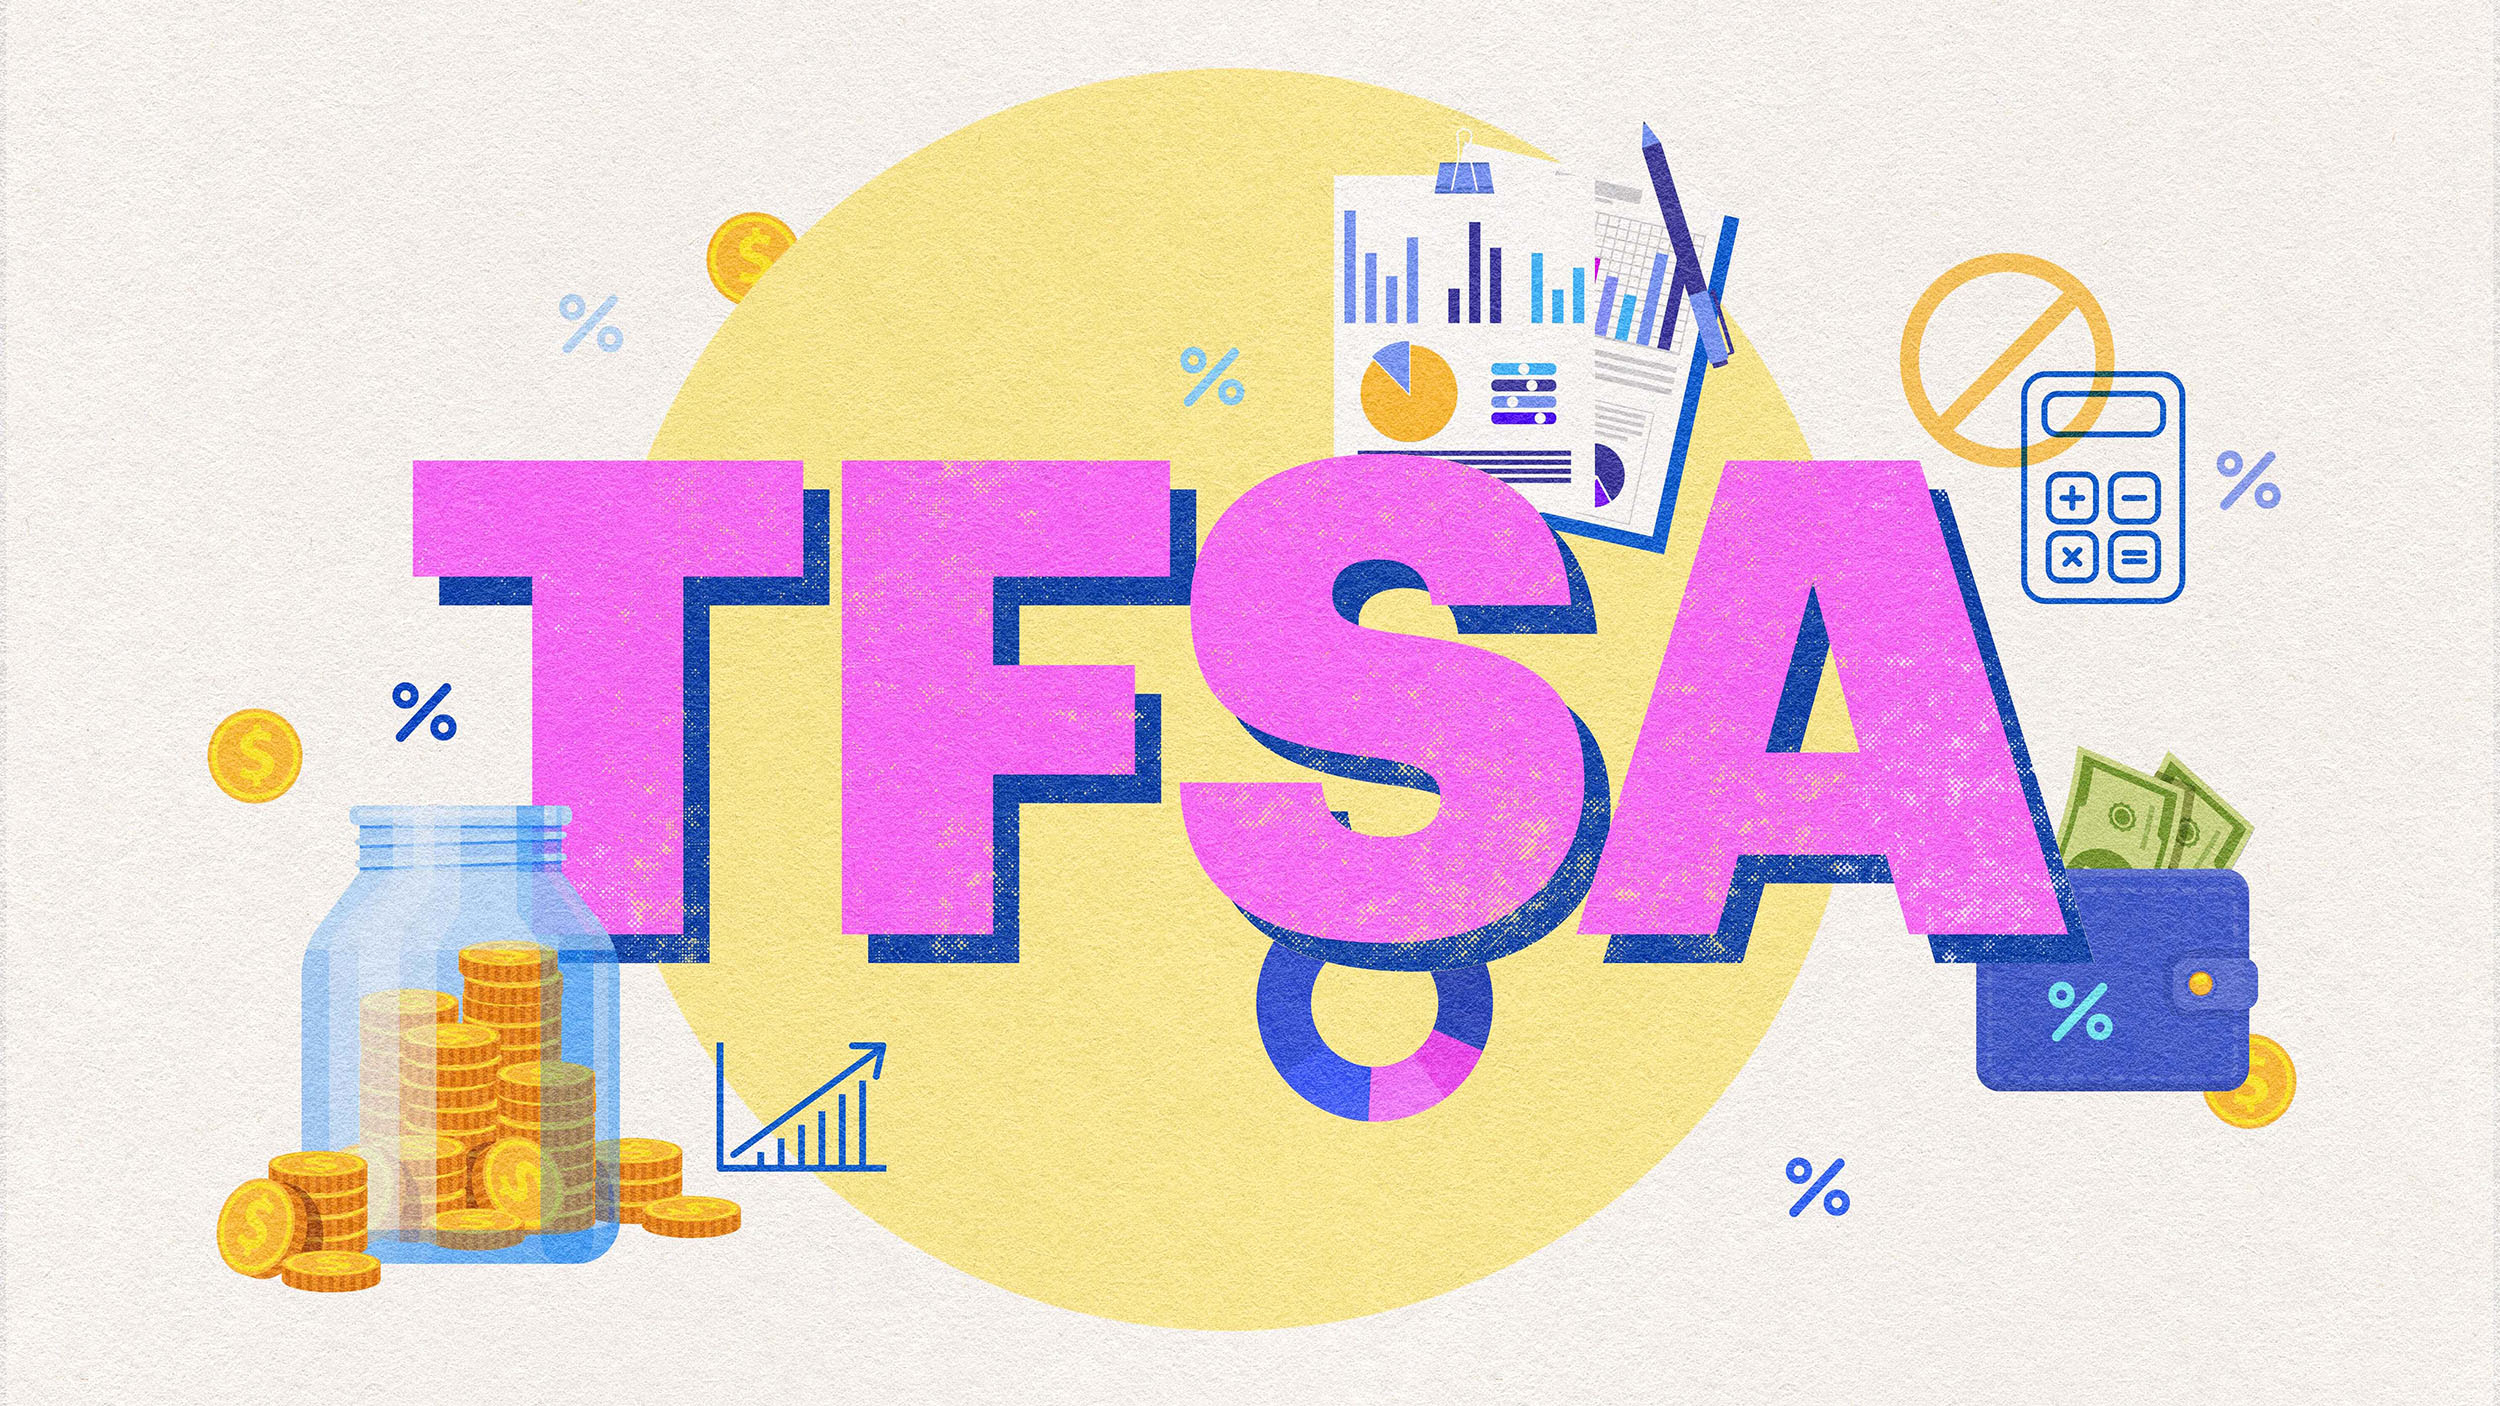 Illustration featuring large letters that read "TFSA", surrounded by tax forms, calculators, percent signs and a coin jar.